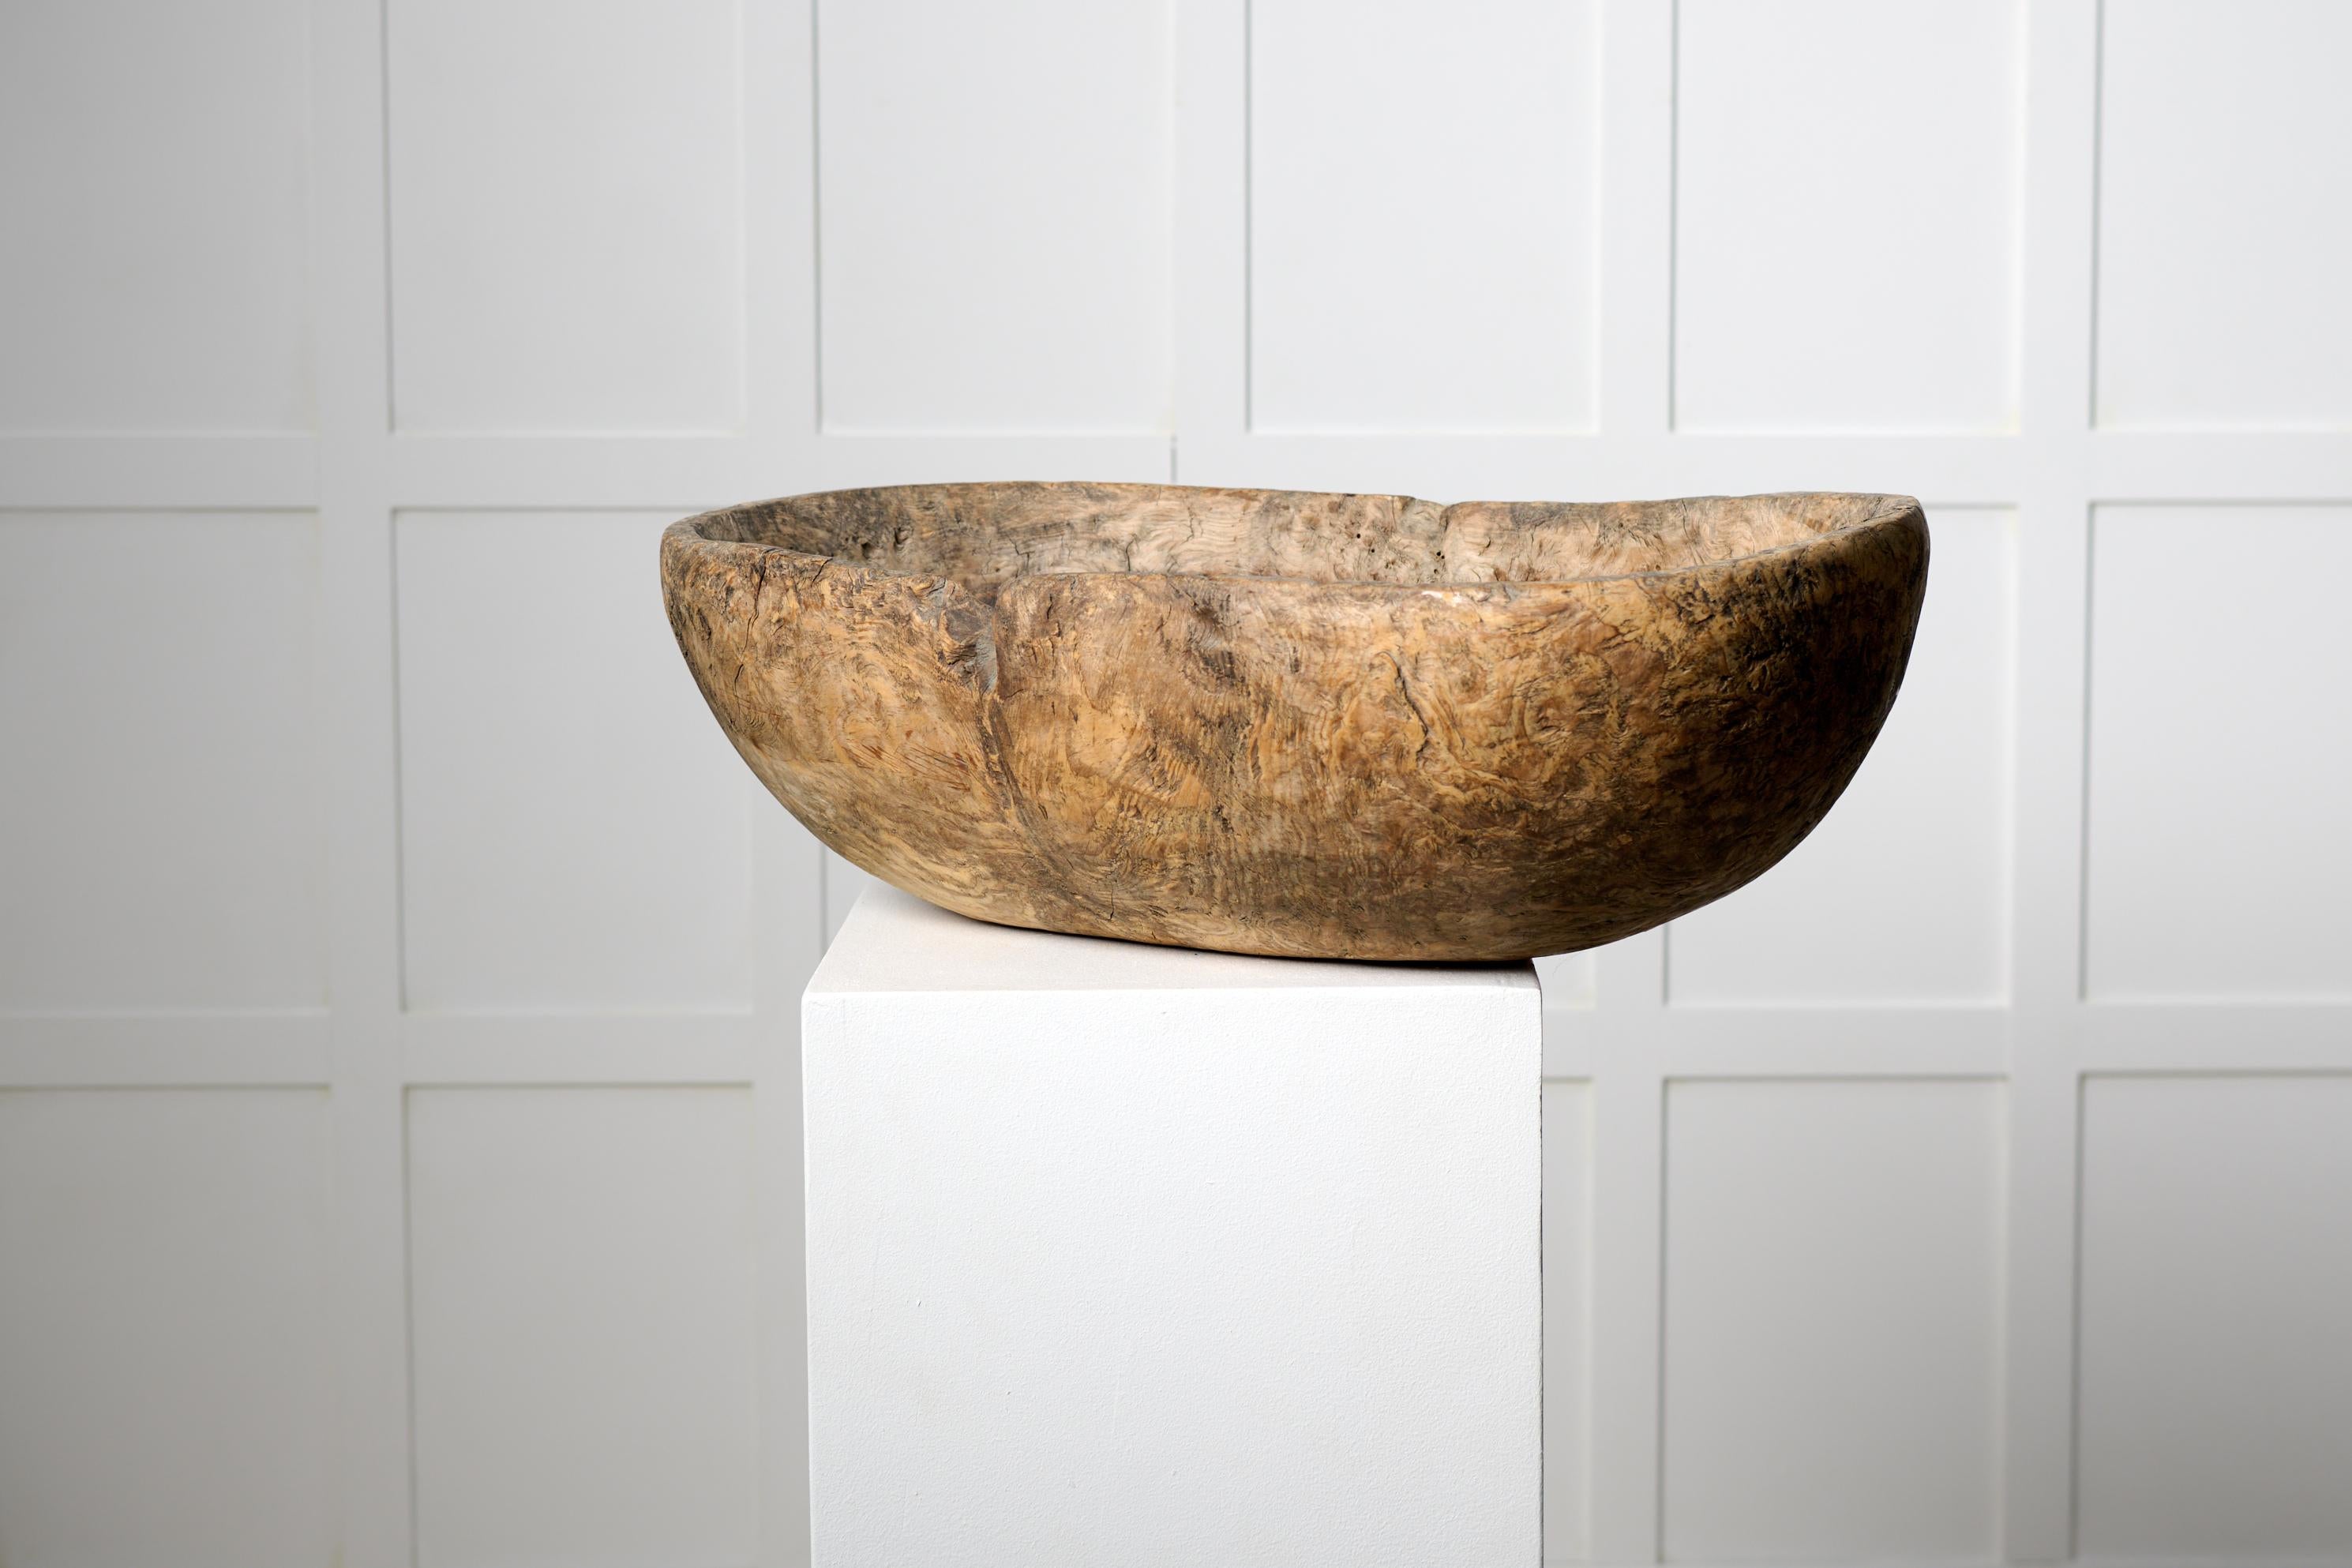 Unusual Swedish antique bowl from the late 1700s. The bowl is a large and heavy root bowl in an organic shape made in solid birch root. Made by hand with a great patina after 200 years of use. It would have been used in the household during the 18th